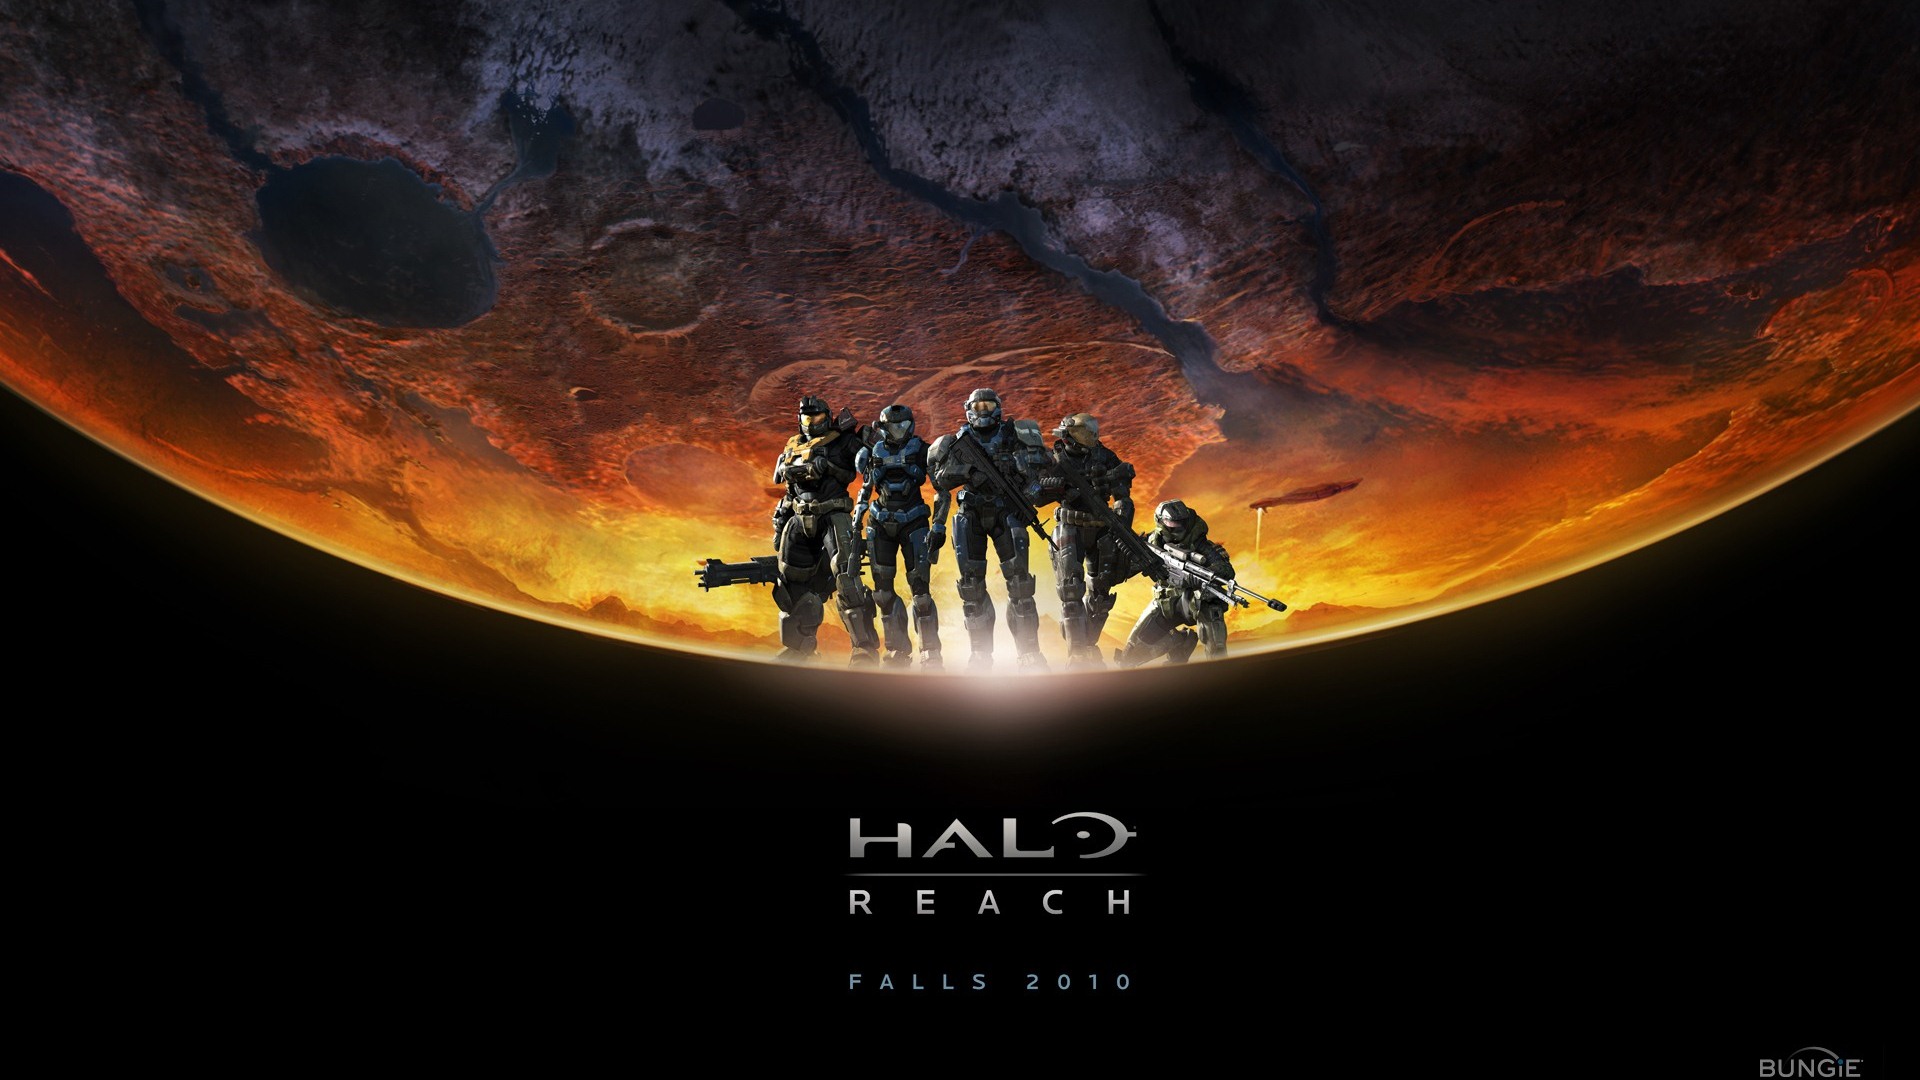 Halo game HD wallpapers #27 - 1920x1080